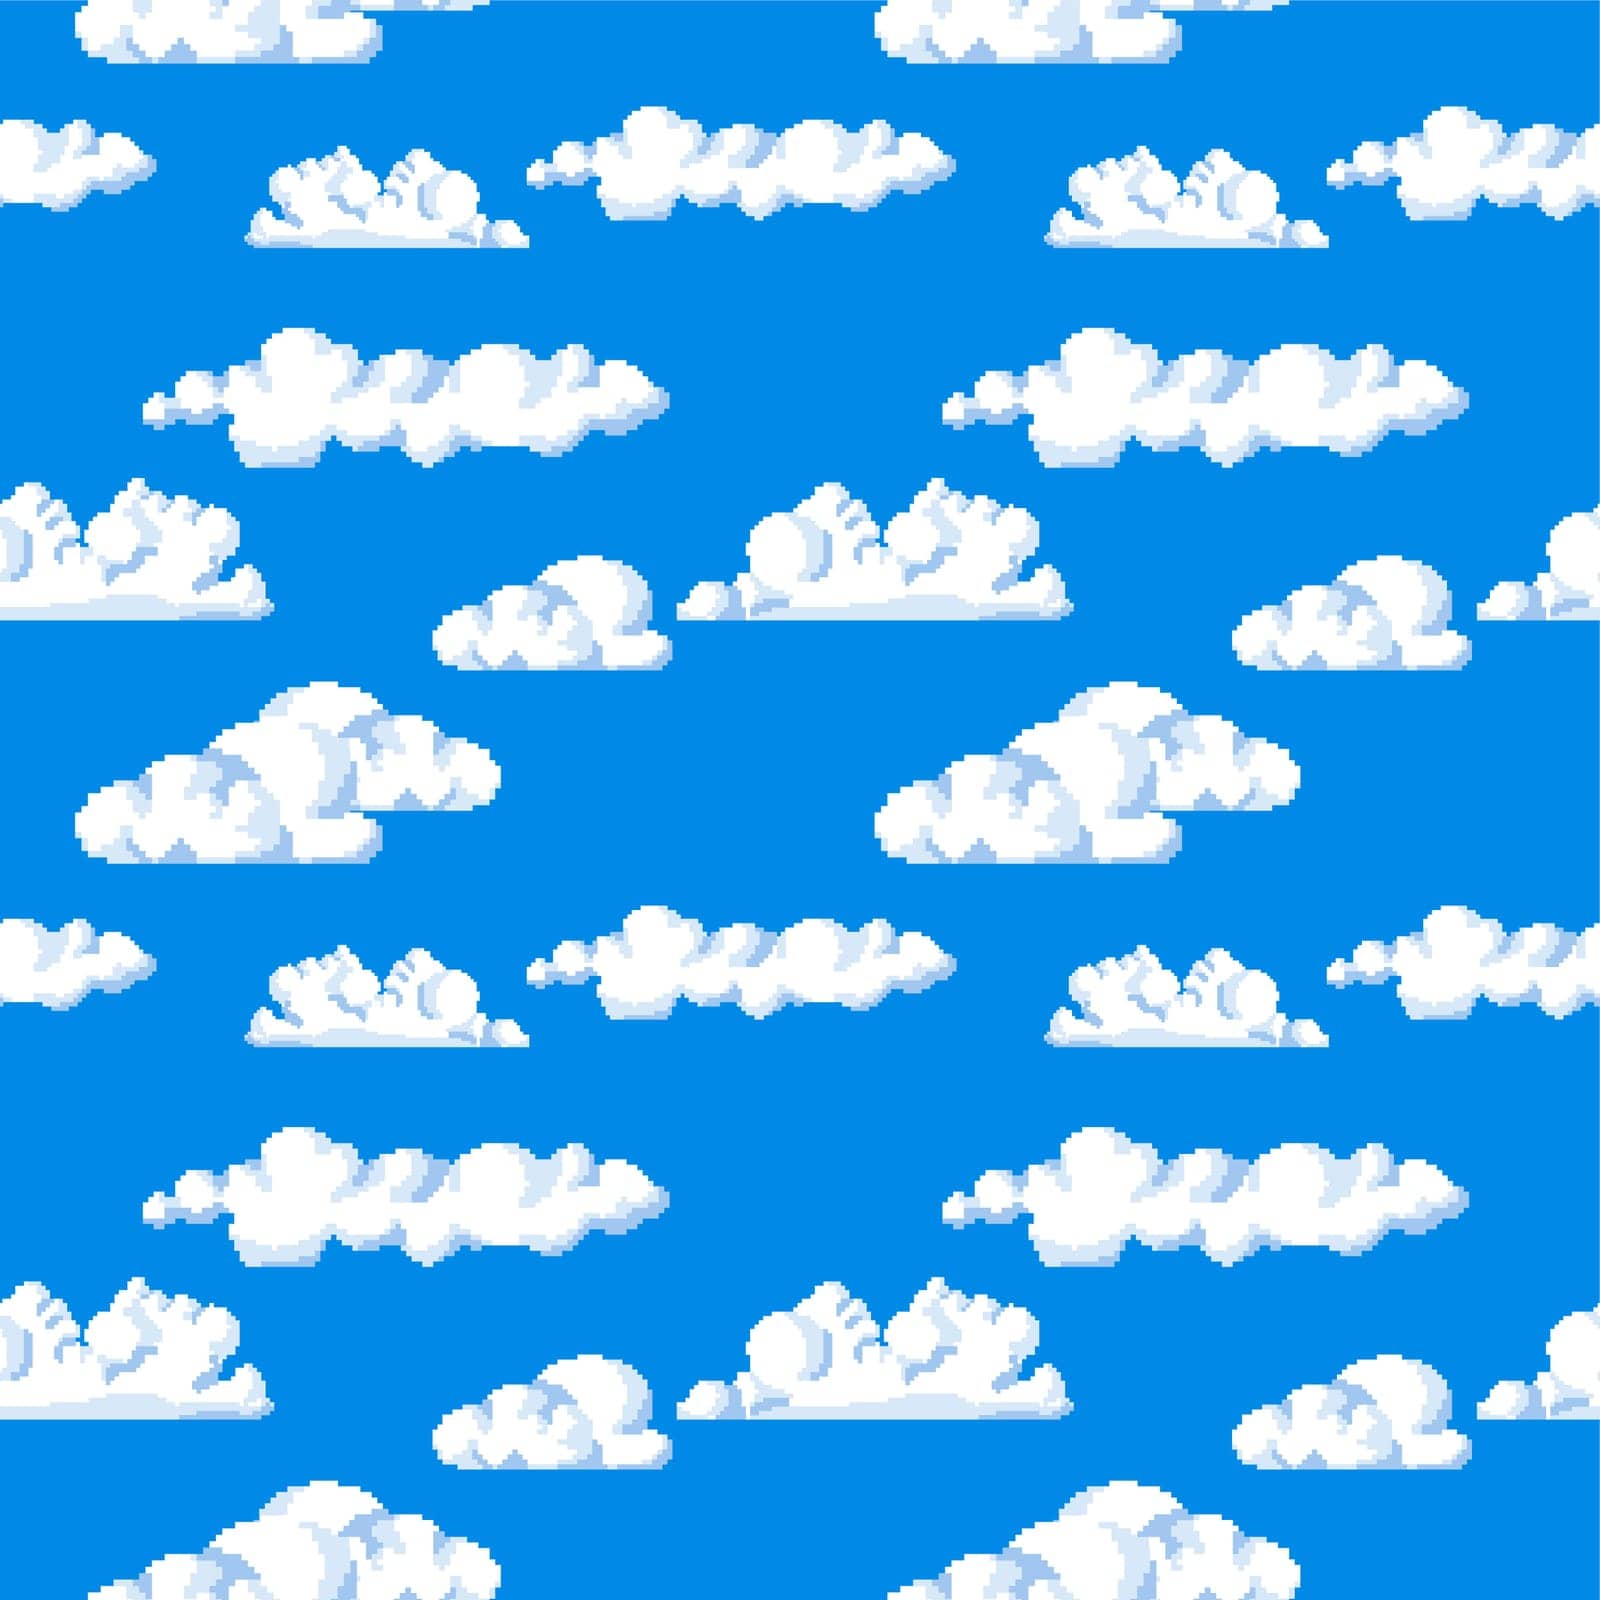 Cloudy sky, pixelated cloudscape of nature vector by Sonulkaster